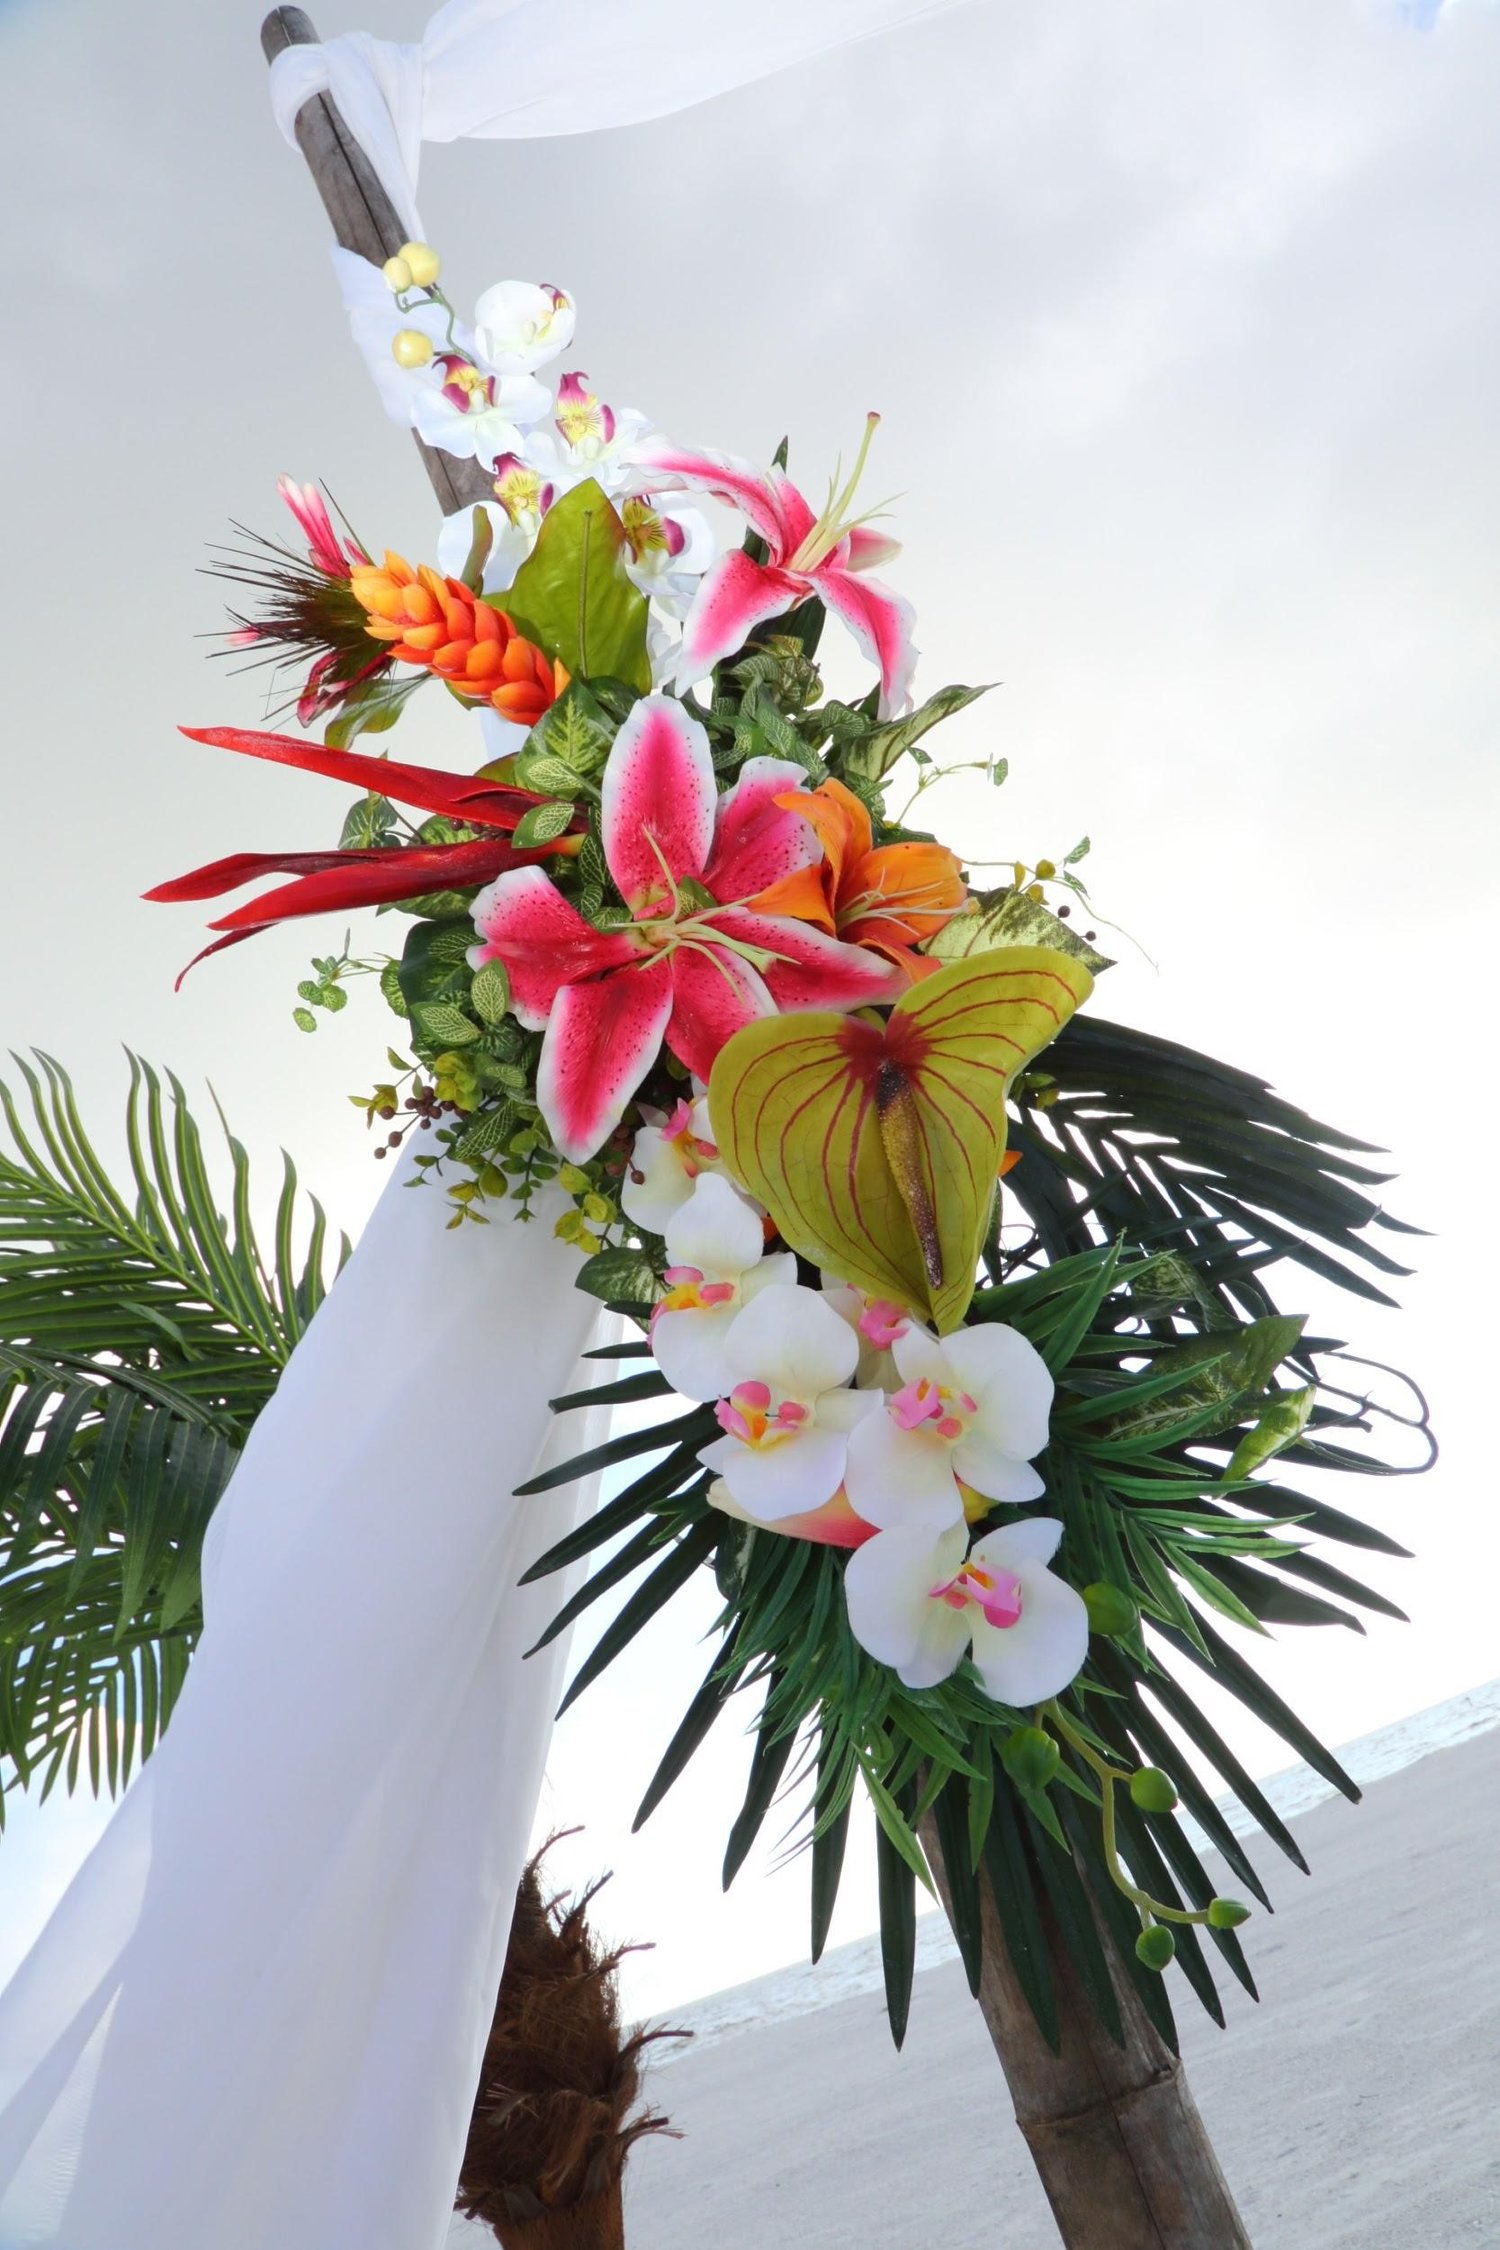 We just love these stunning tropical flowers for the ceremony arch!